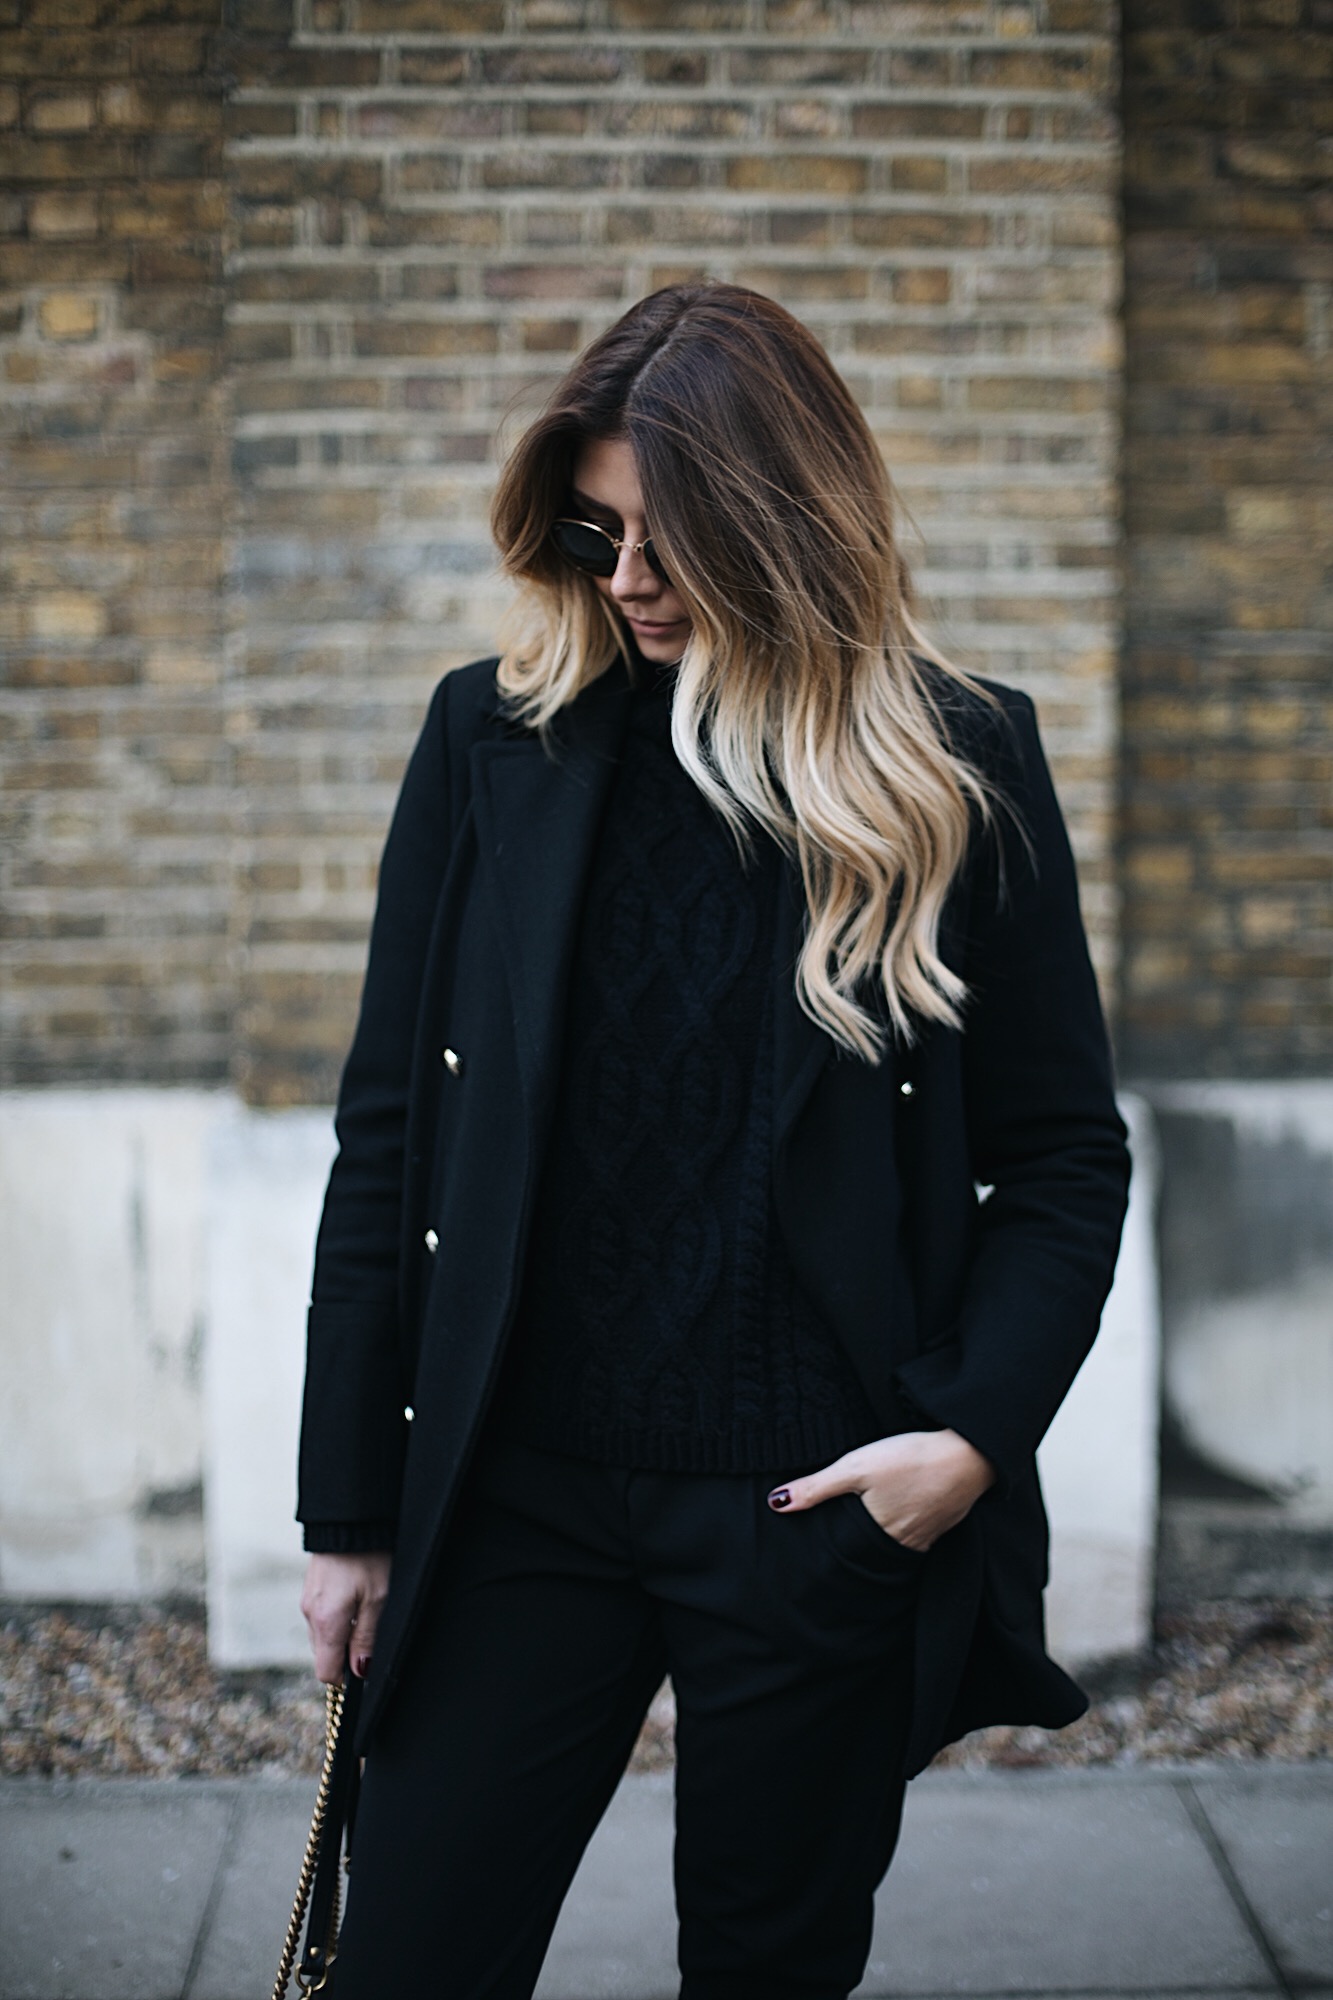 long blonde balayage hair, black military jacket coat, black sweater, black jeans, all black outfit